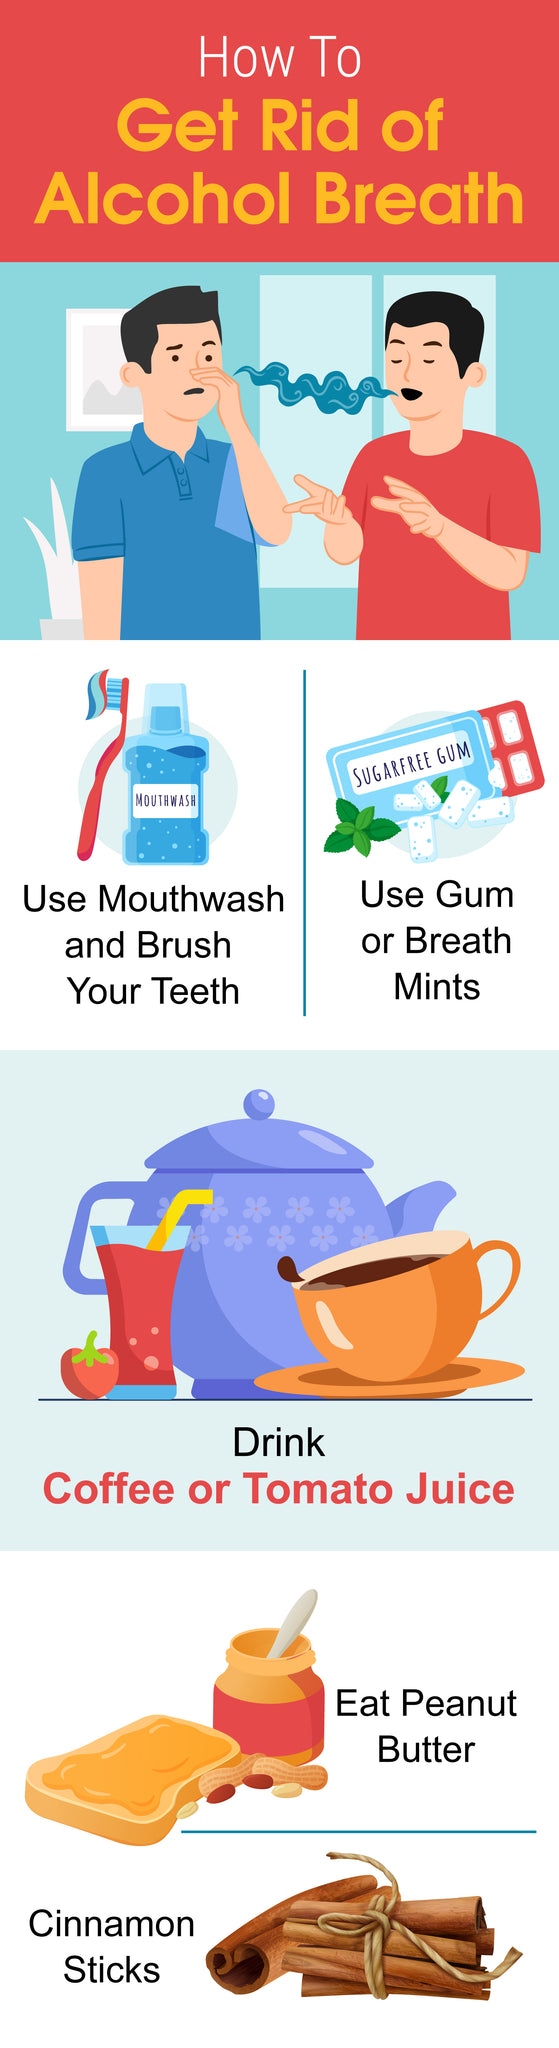 How to get rid of alcohol breath infographic